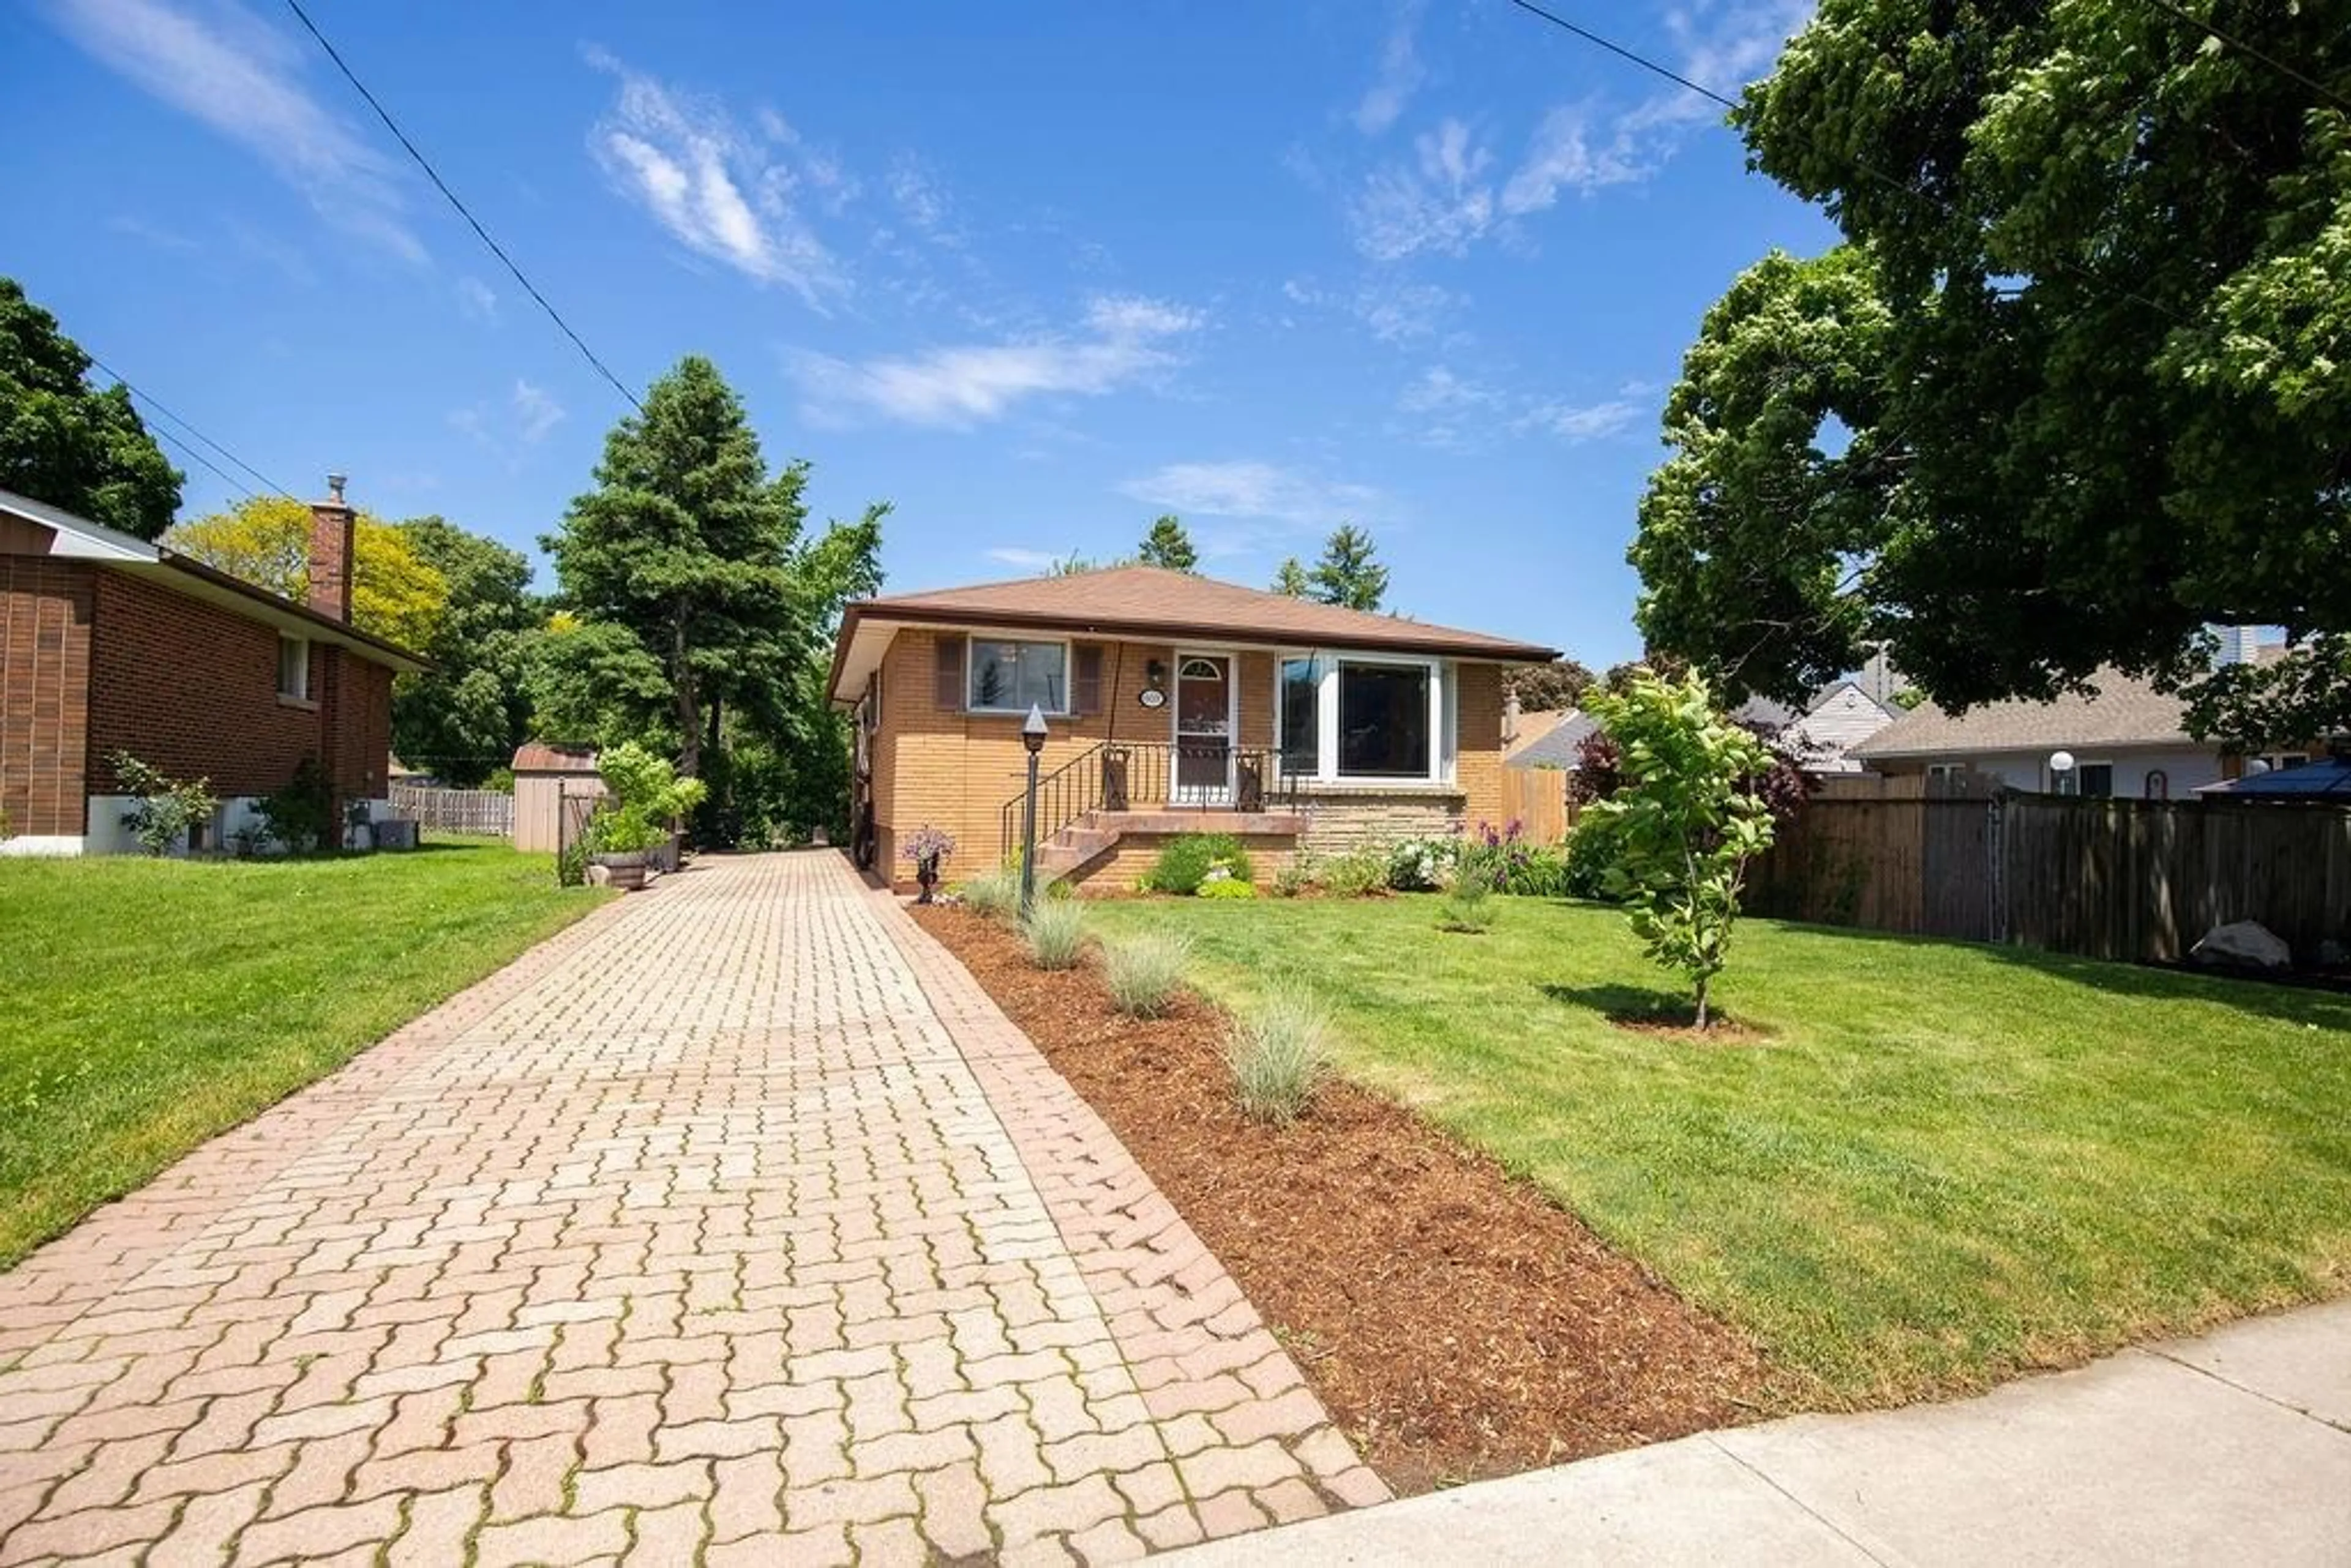 Home with brick exterior material for 607 7th Ave, Hamilton Ontario L8V 1Y6